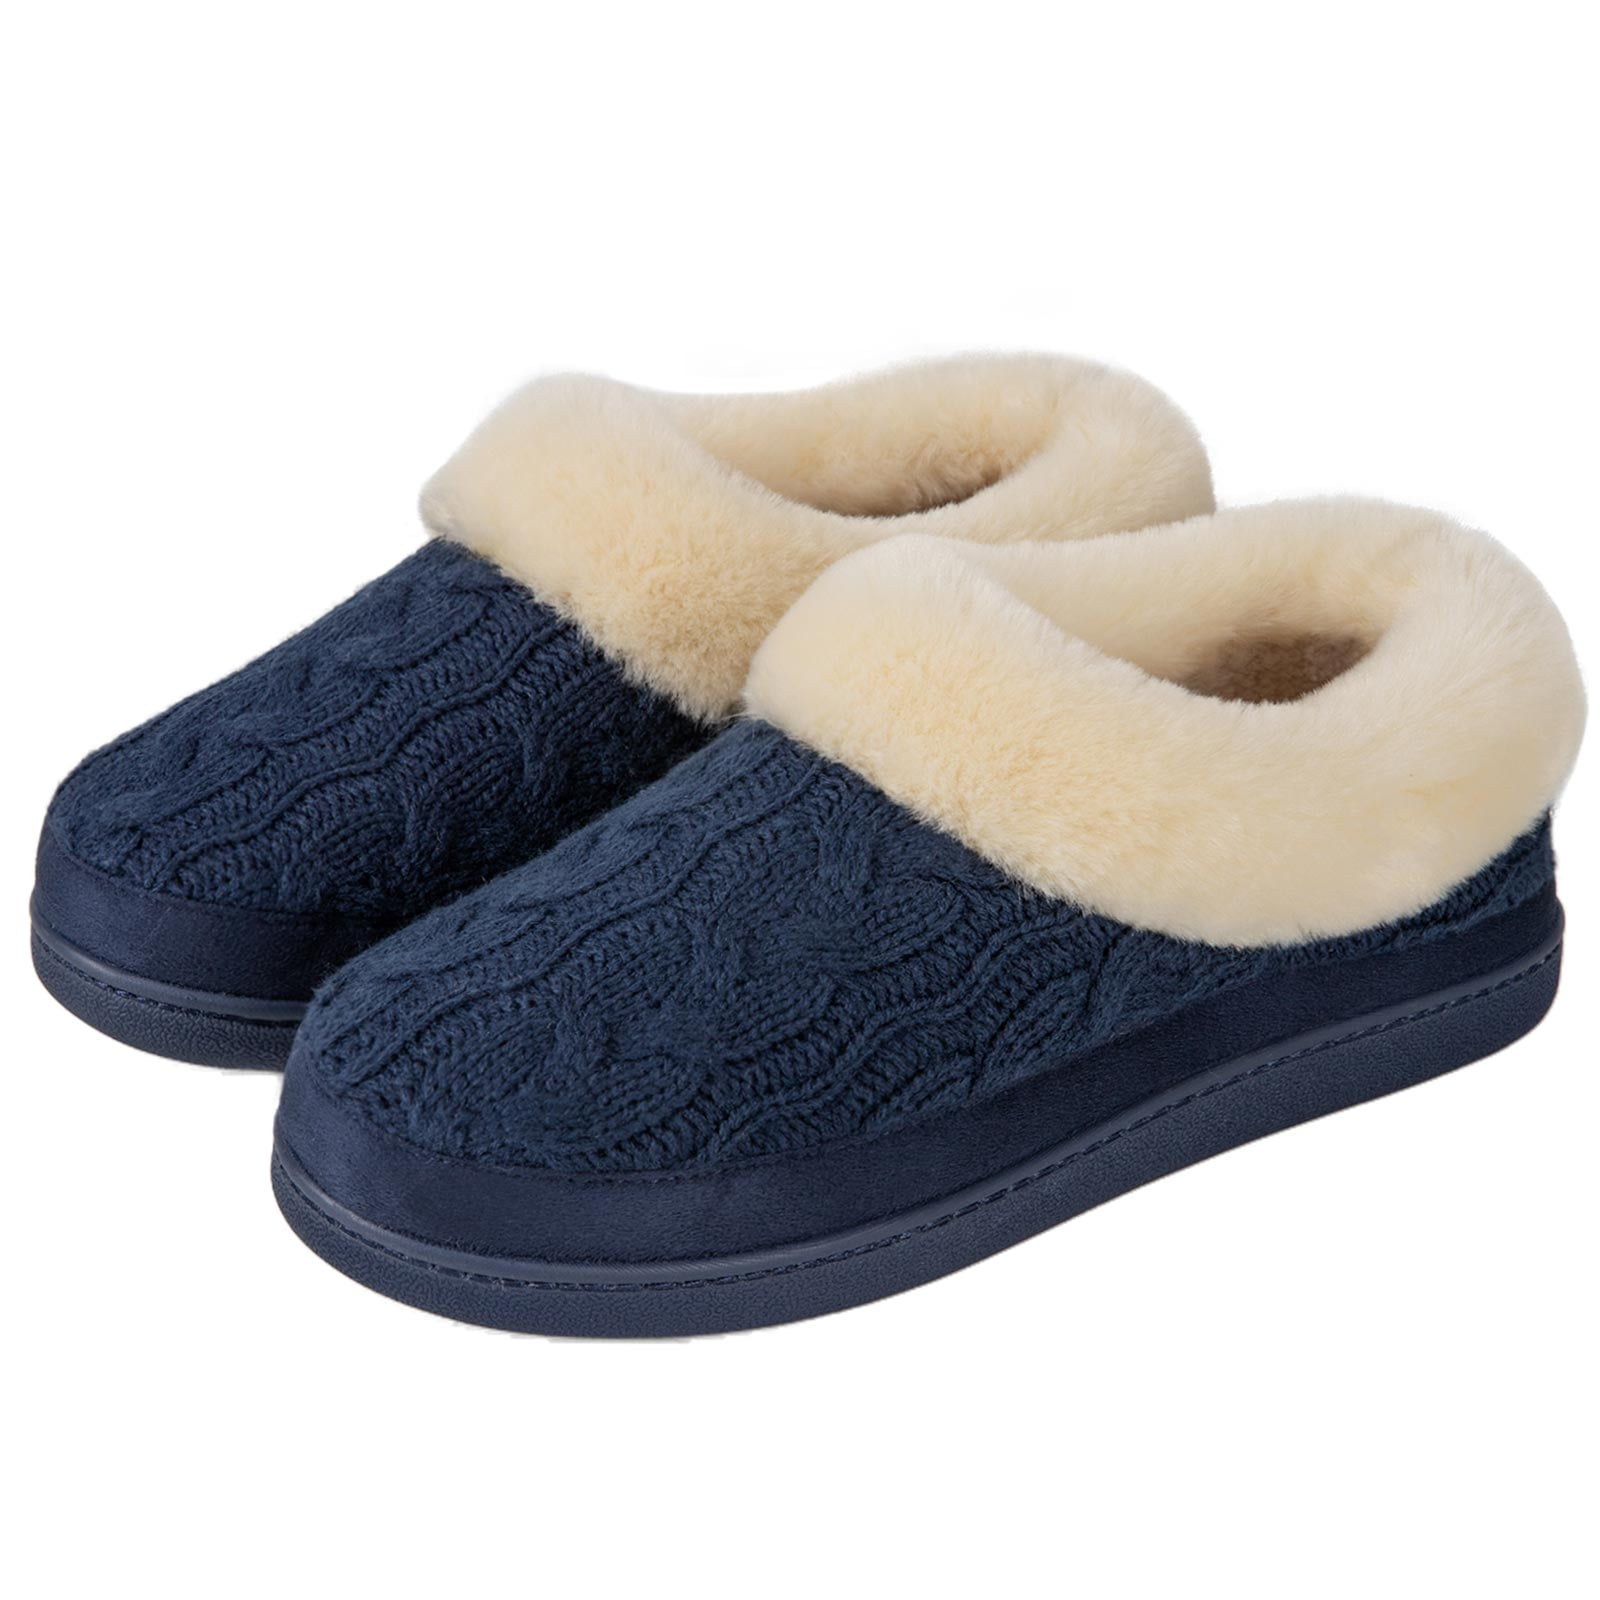 HomeTop Women's Cozy Cable Knit Memory Foam House Shoes Slipper with ...